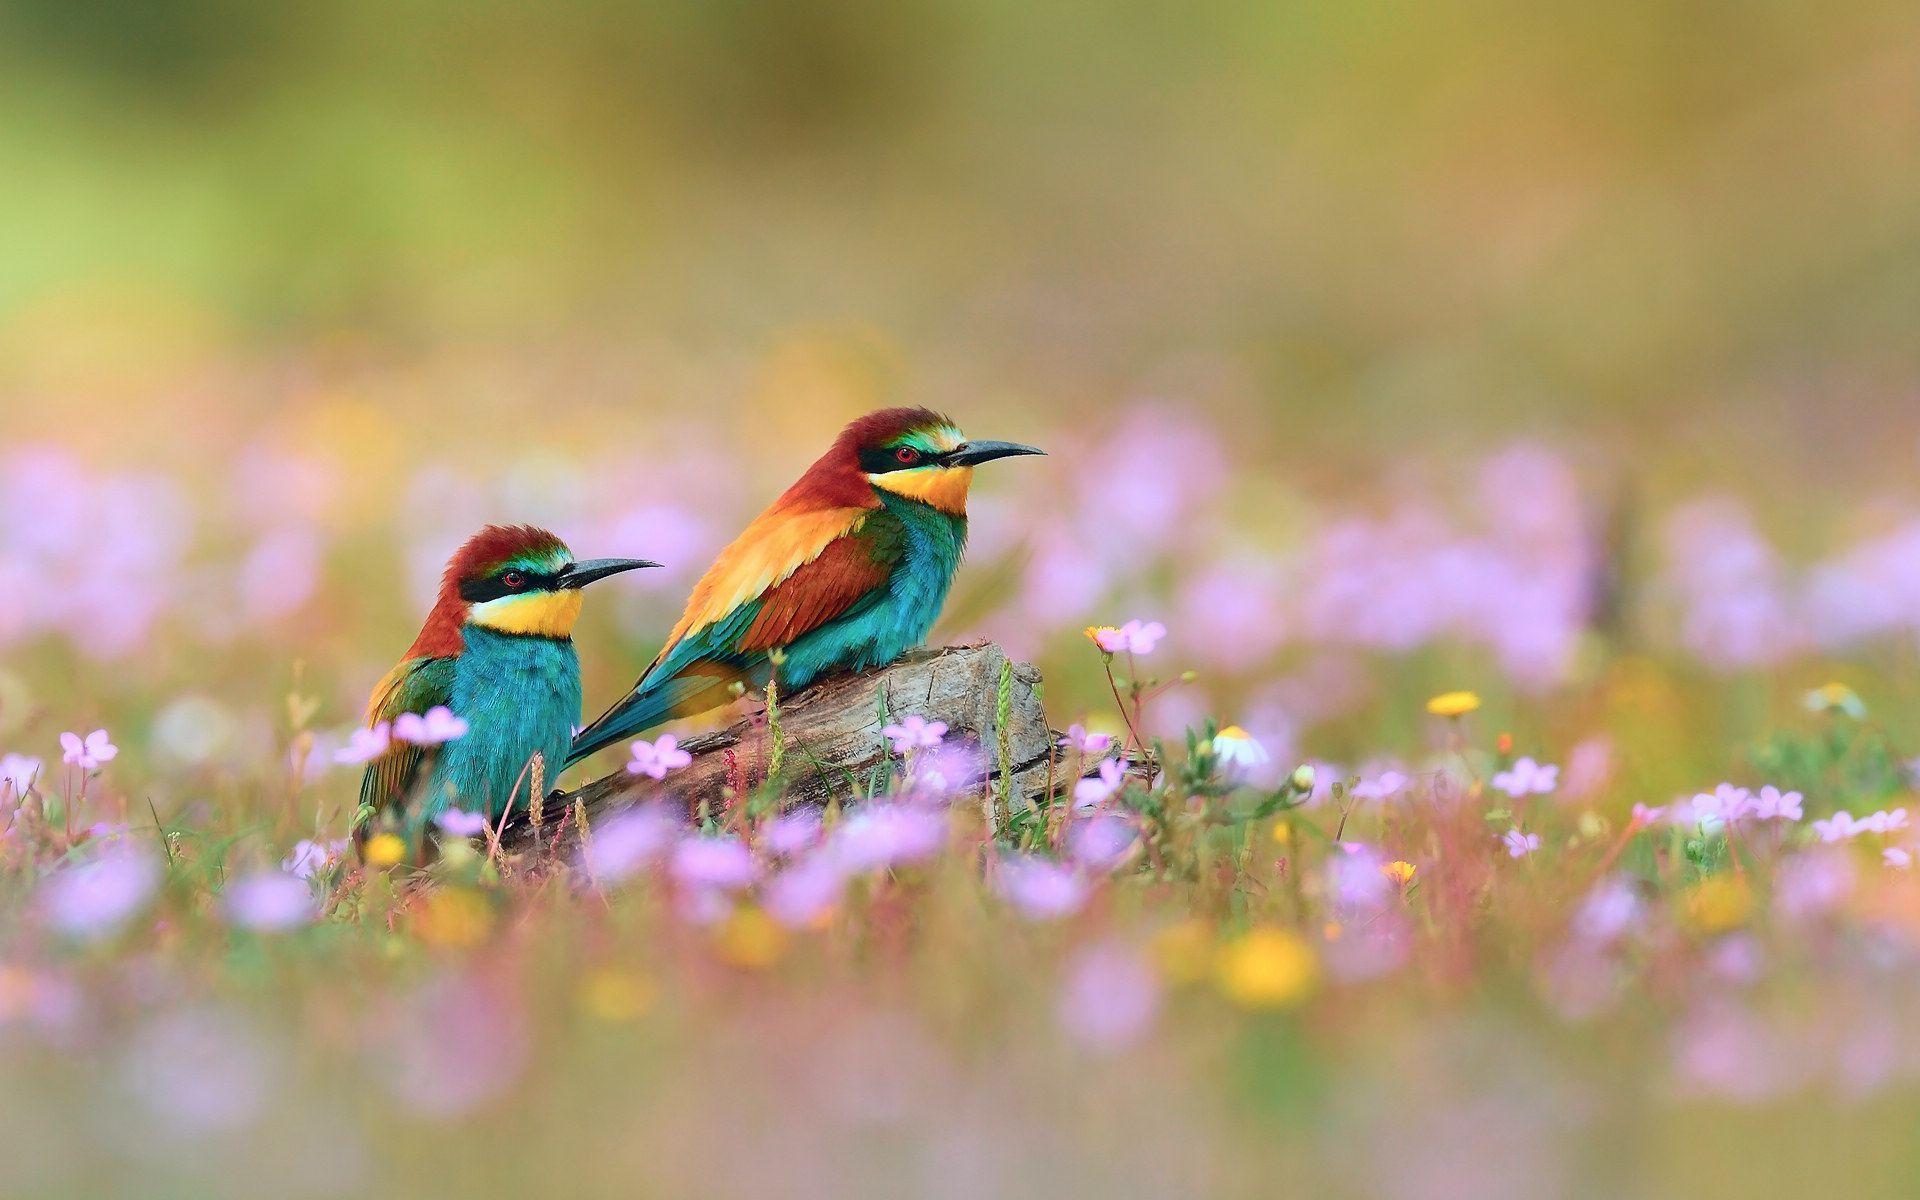 Spring Flowers And Birds Wallpaper Picture 5 HD Wallpaper. Cute